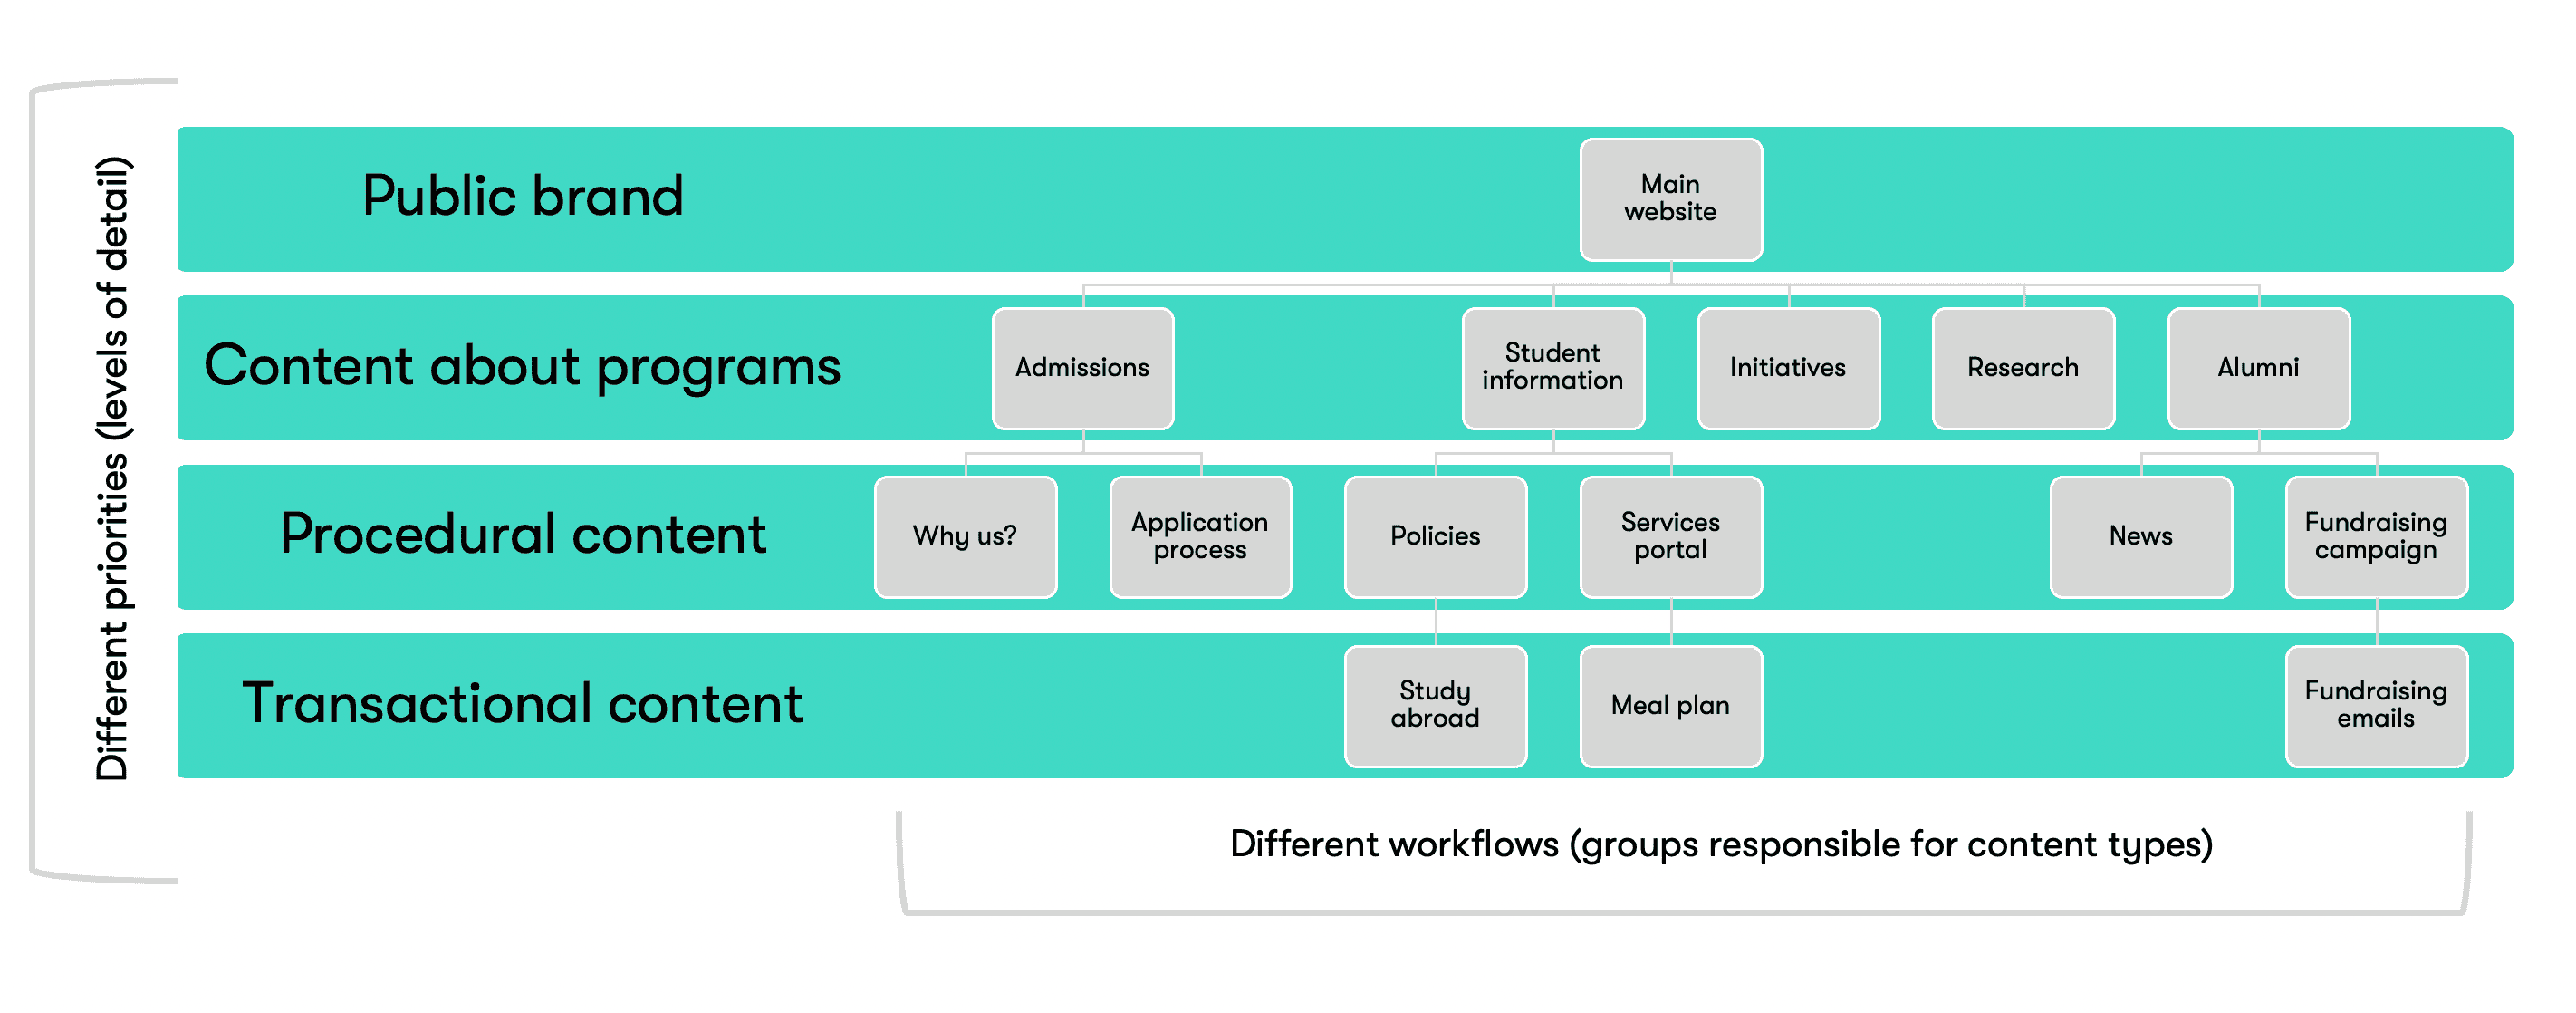 Defining priorities and workflows for specific types of content makes processes more efficient